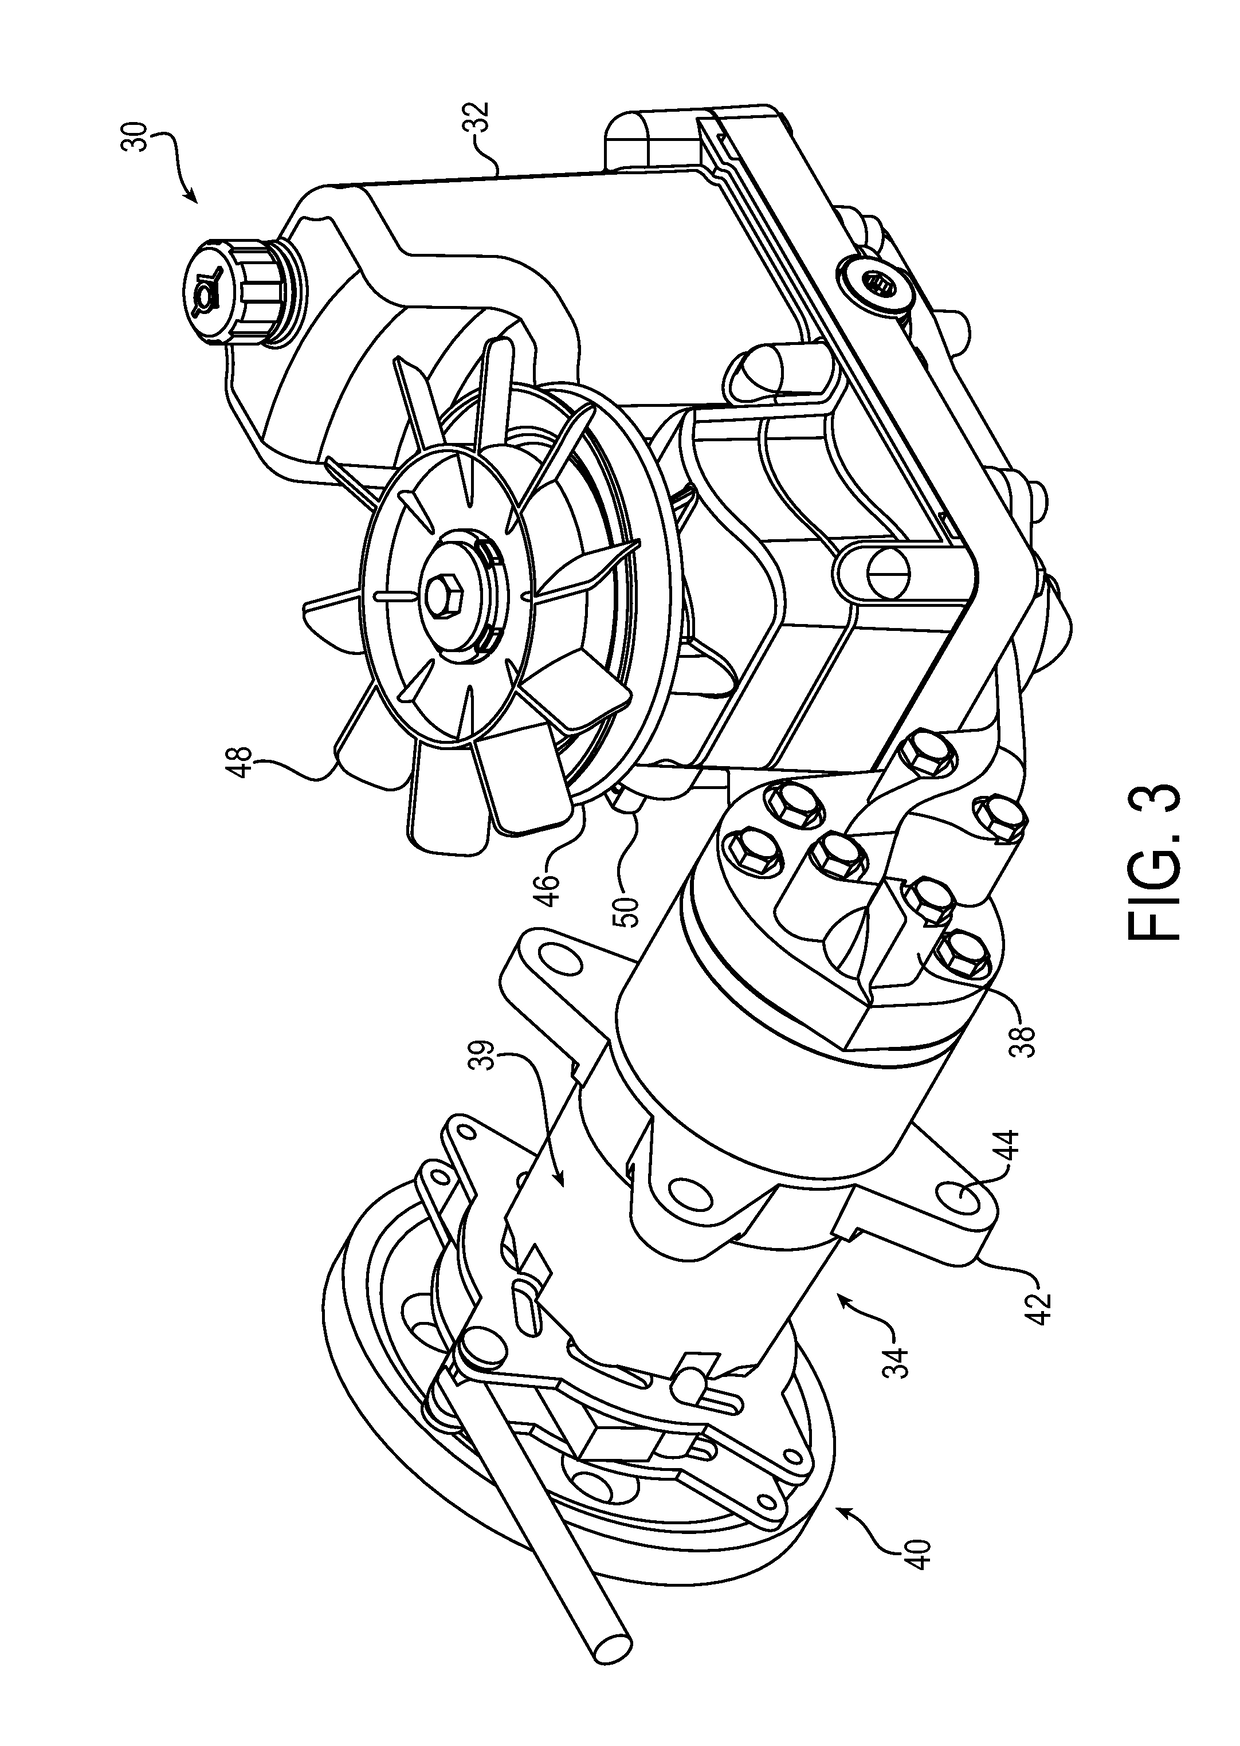 Mowing machine brake apparatus with slideable engagement